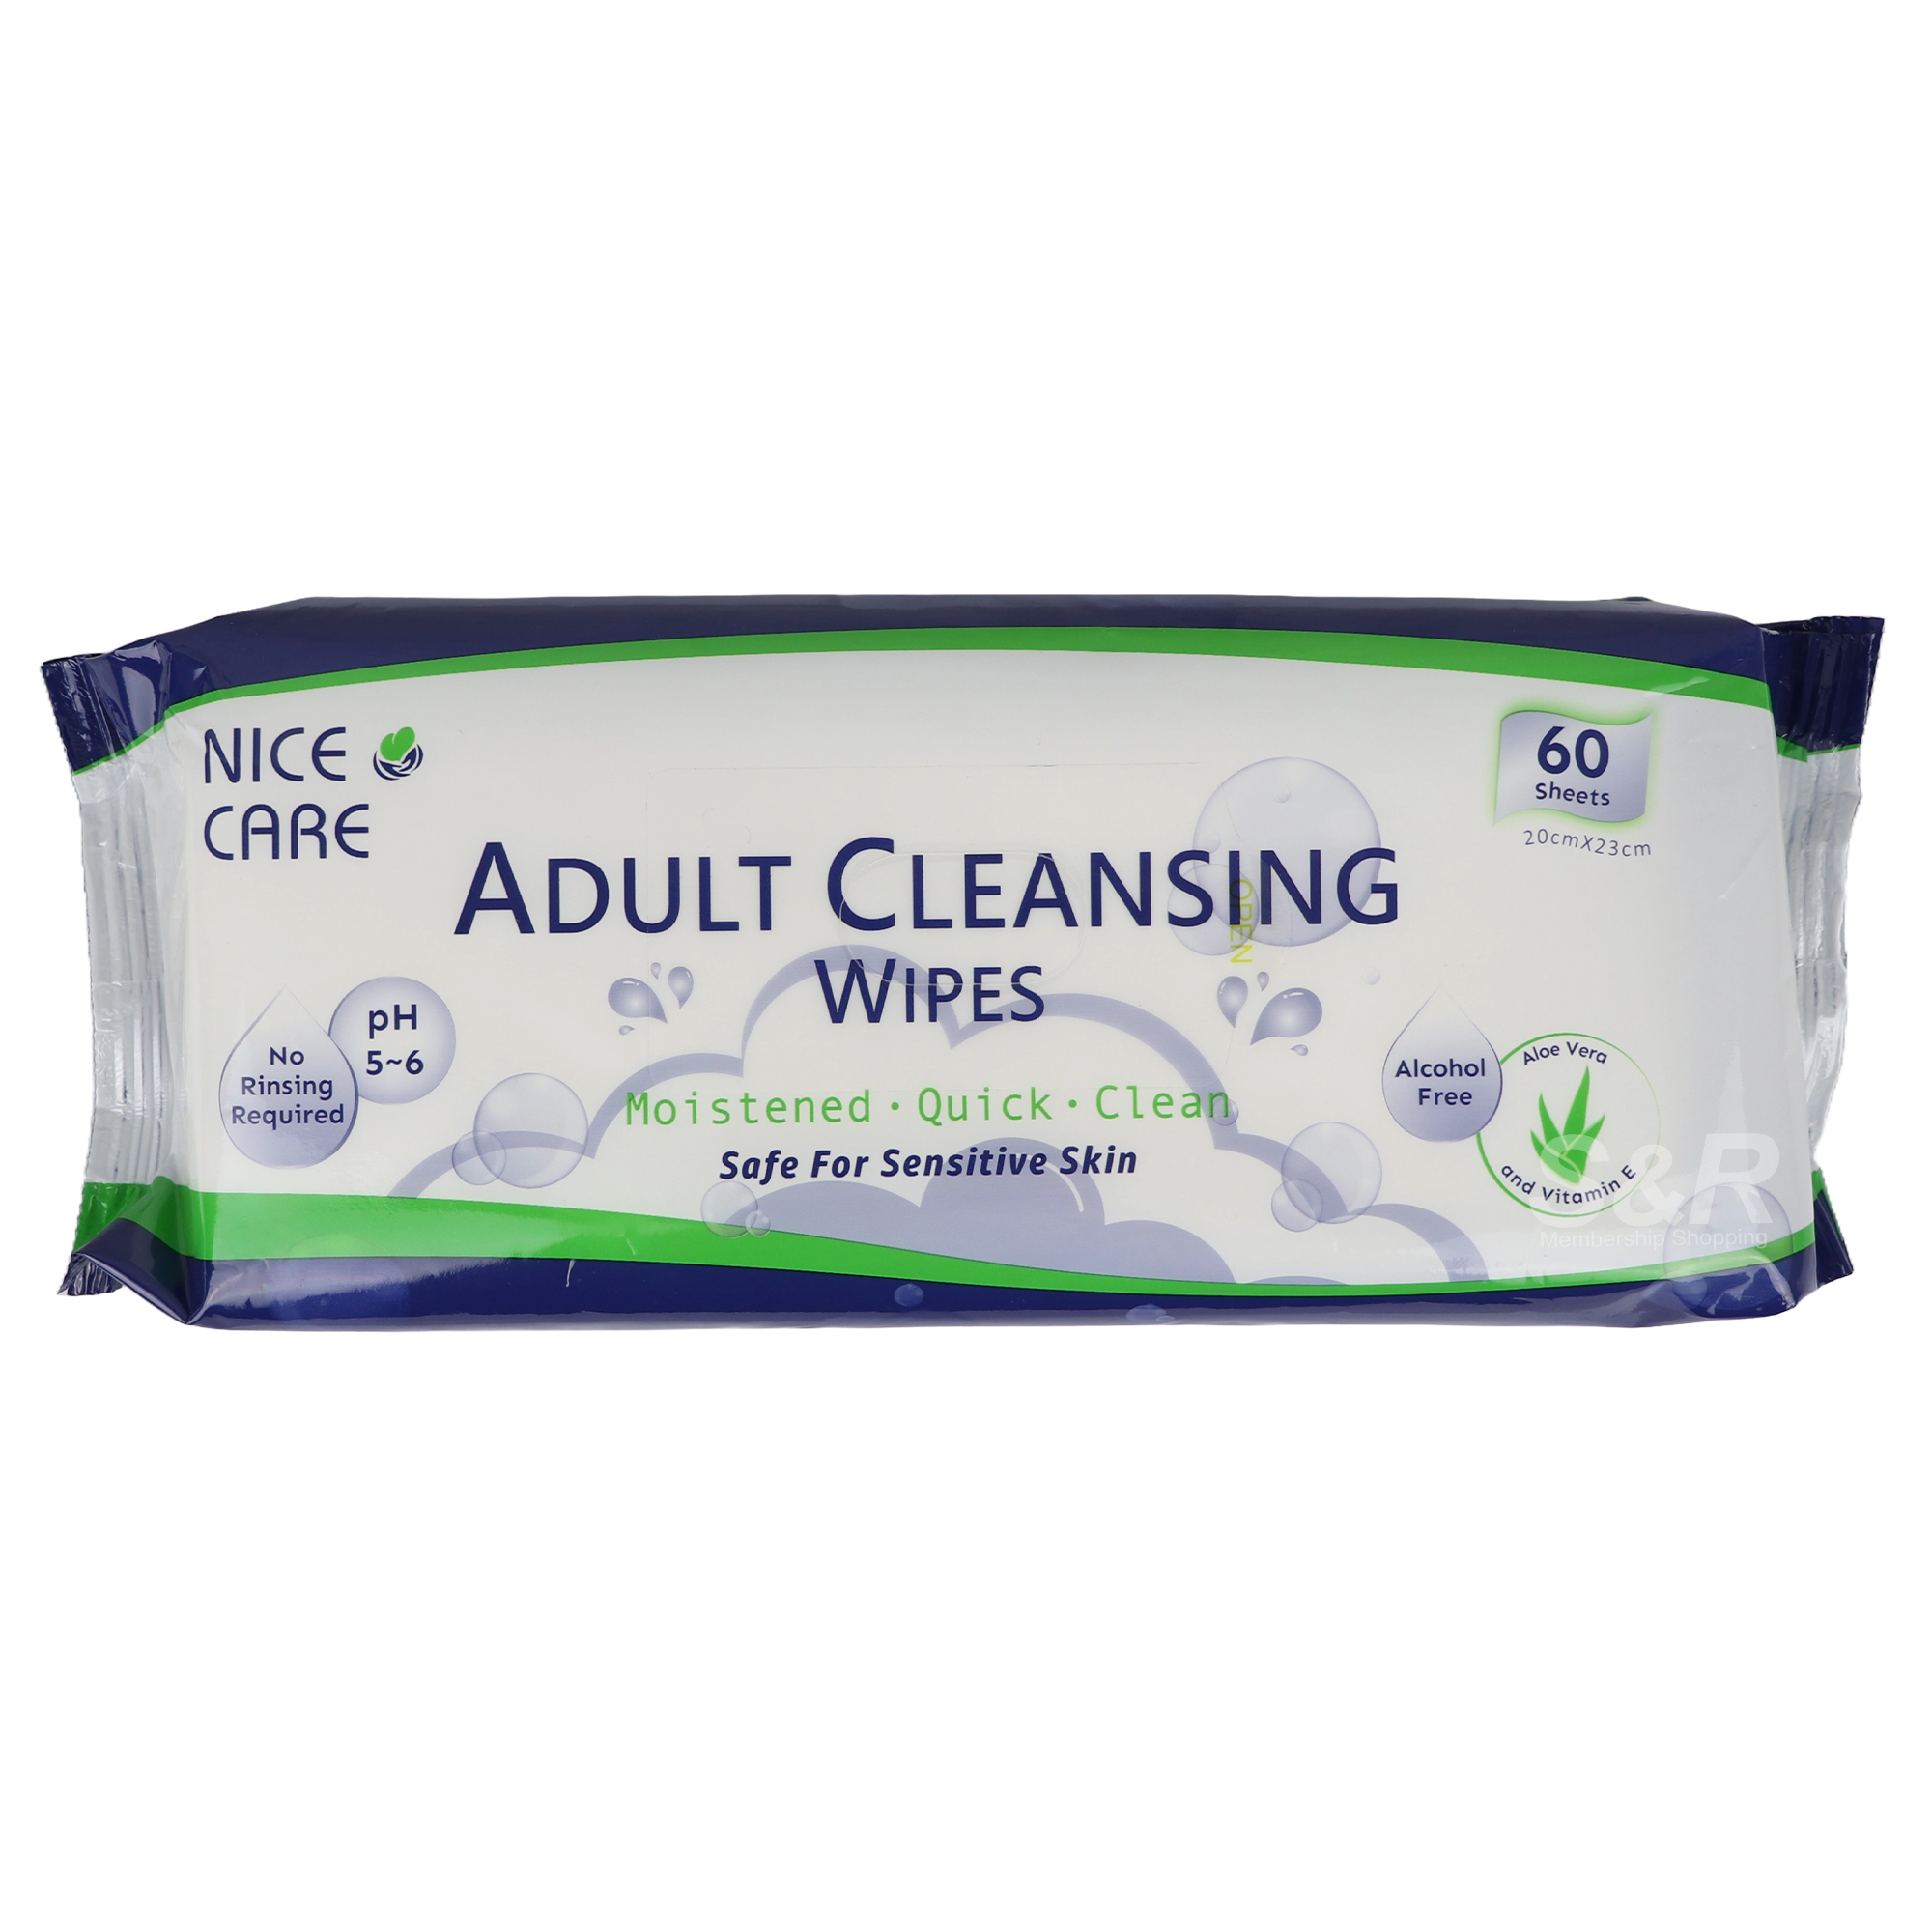 Nice Care Adult Cleansing Wipes 60sheets